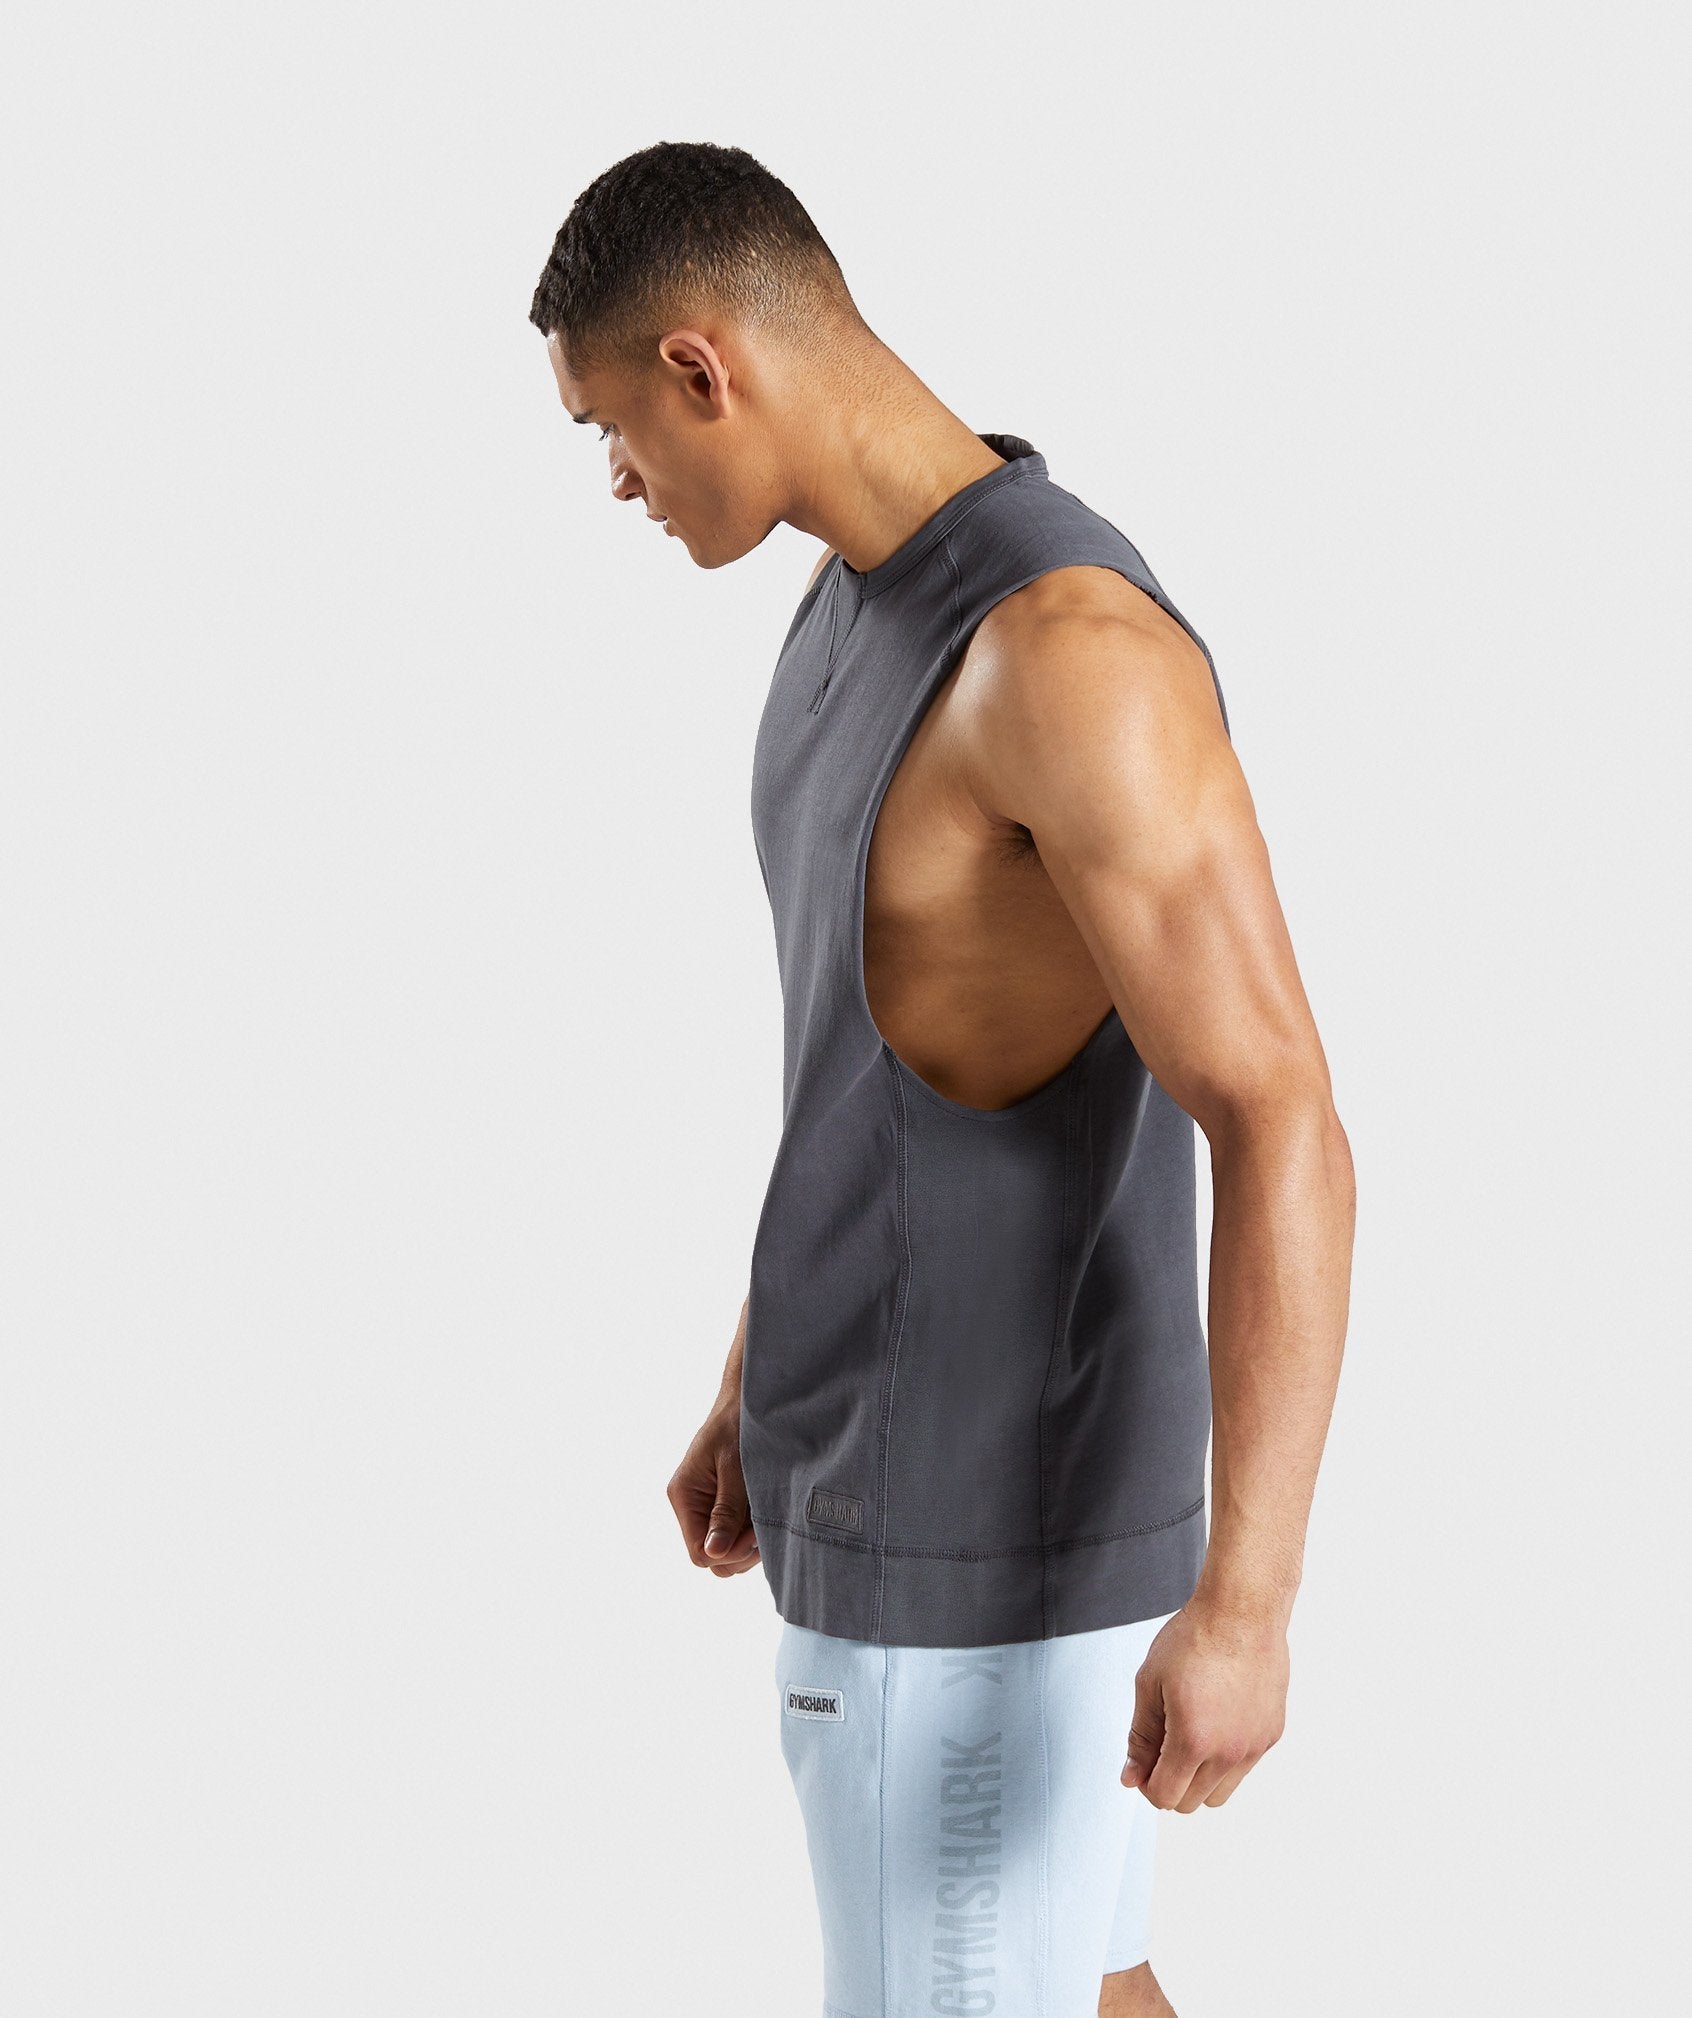 Laundered Drop Arm Tank in Charcoal - view 3